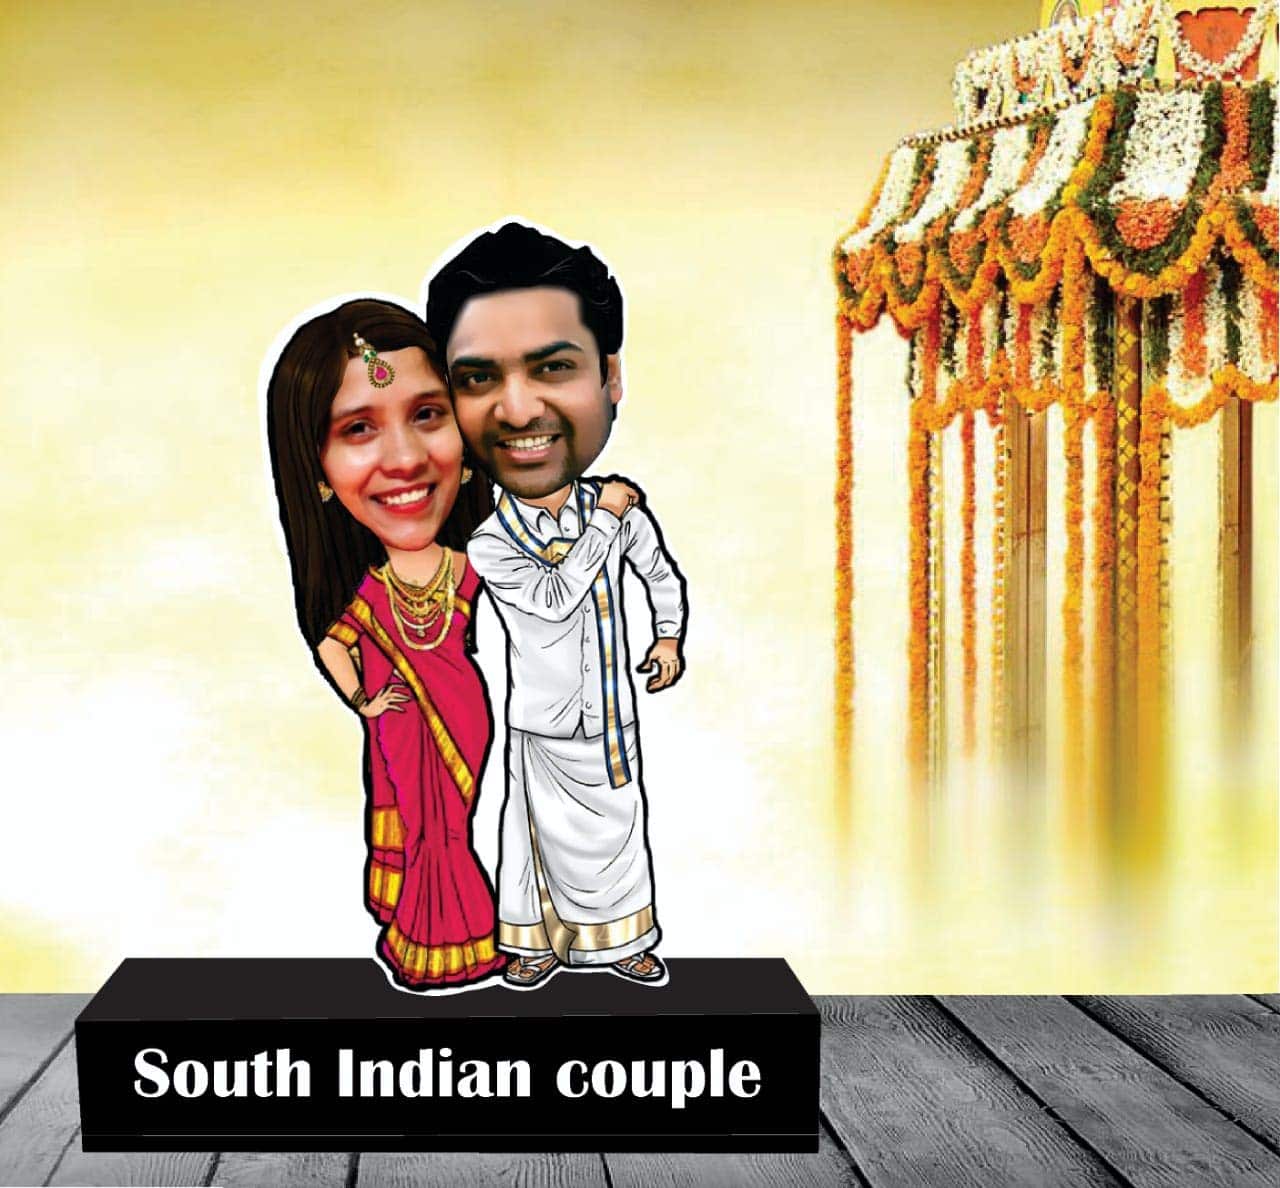 Personalized Gifts for Wife/Women - Caricature Couple Standee with Cutout with Customised Captions (South Indian Couple) - YuvaFlowers